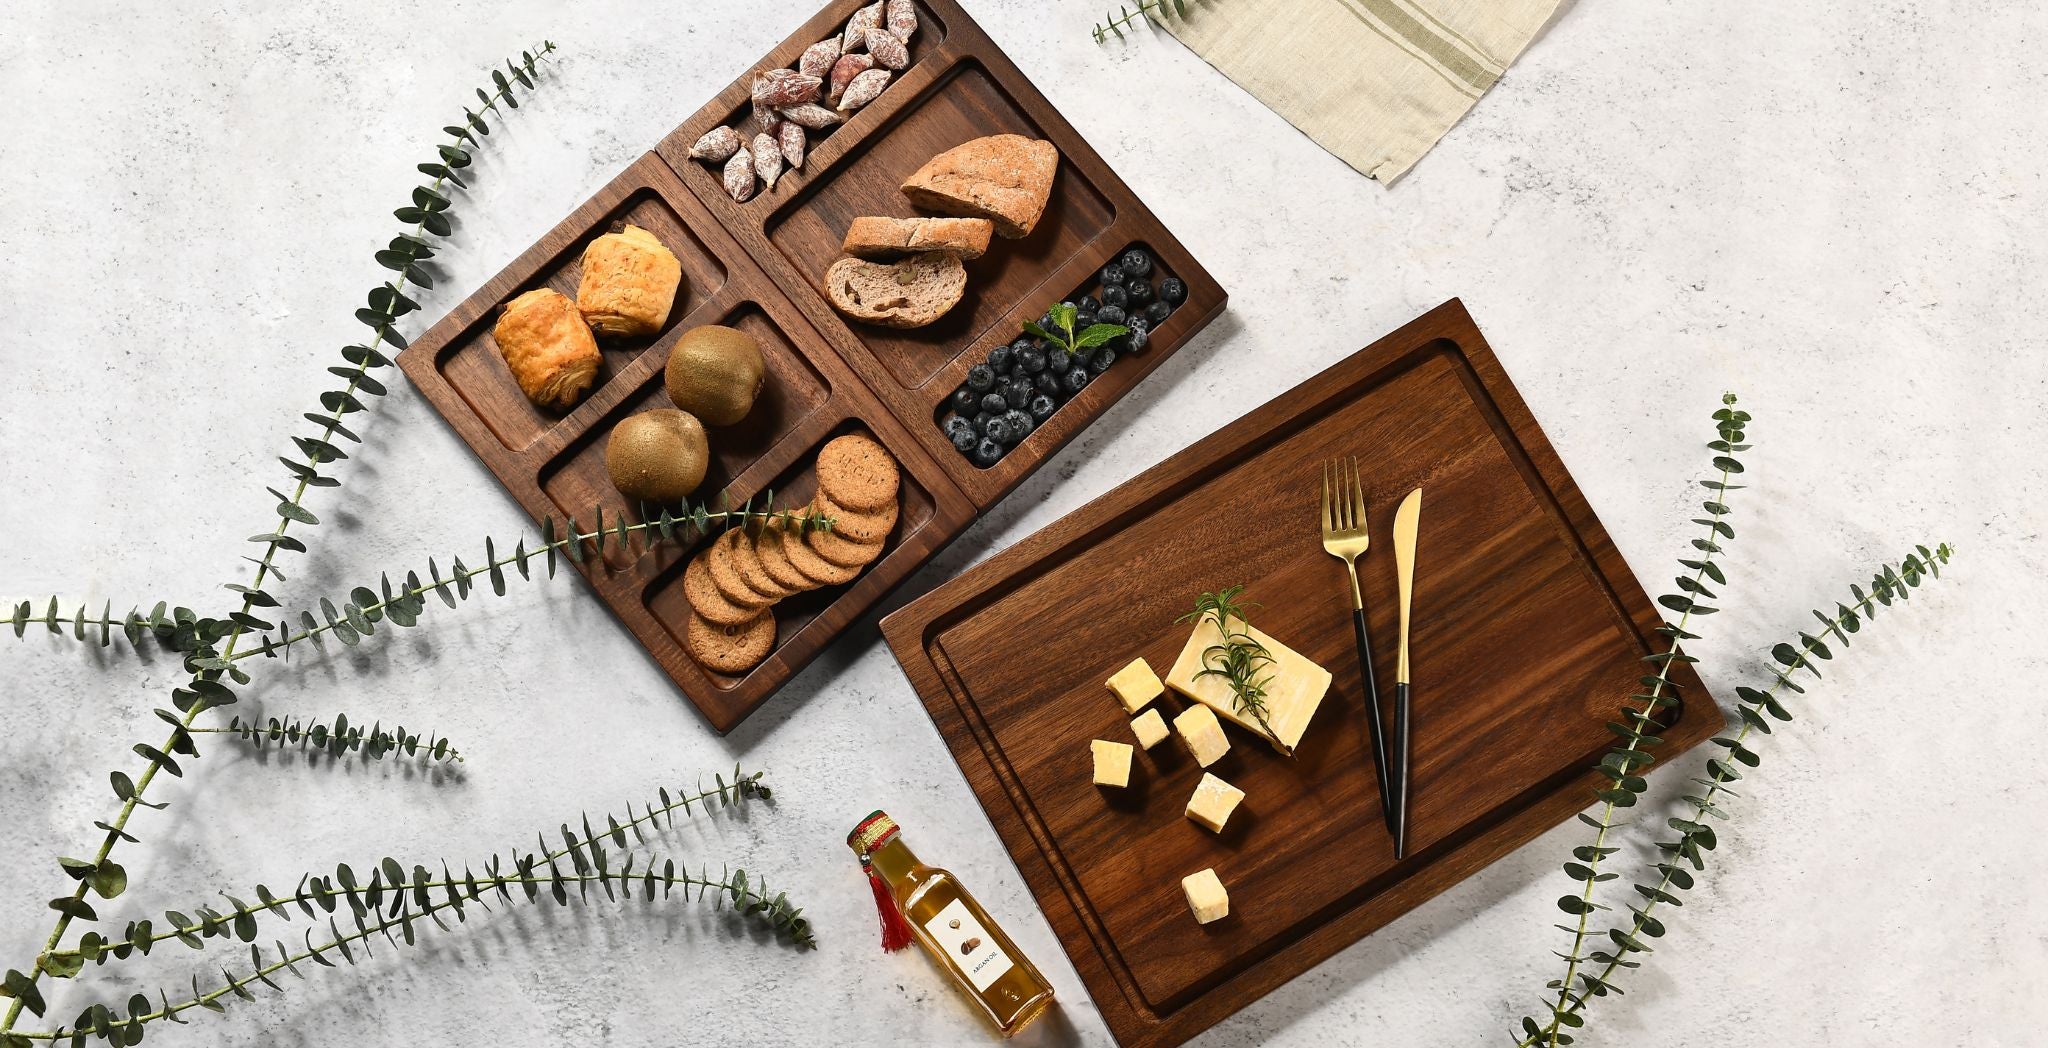 wooden cheese board designs, wood cheese board designs, cheese cutting board designs, creative cheese board designs, cool cheese board designs, engraved cheese board designs